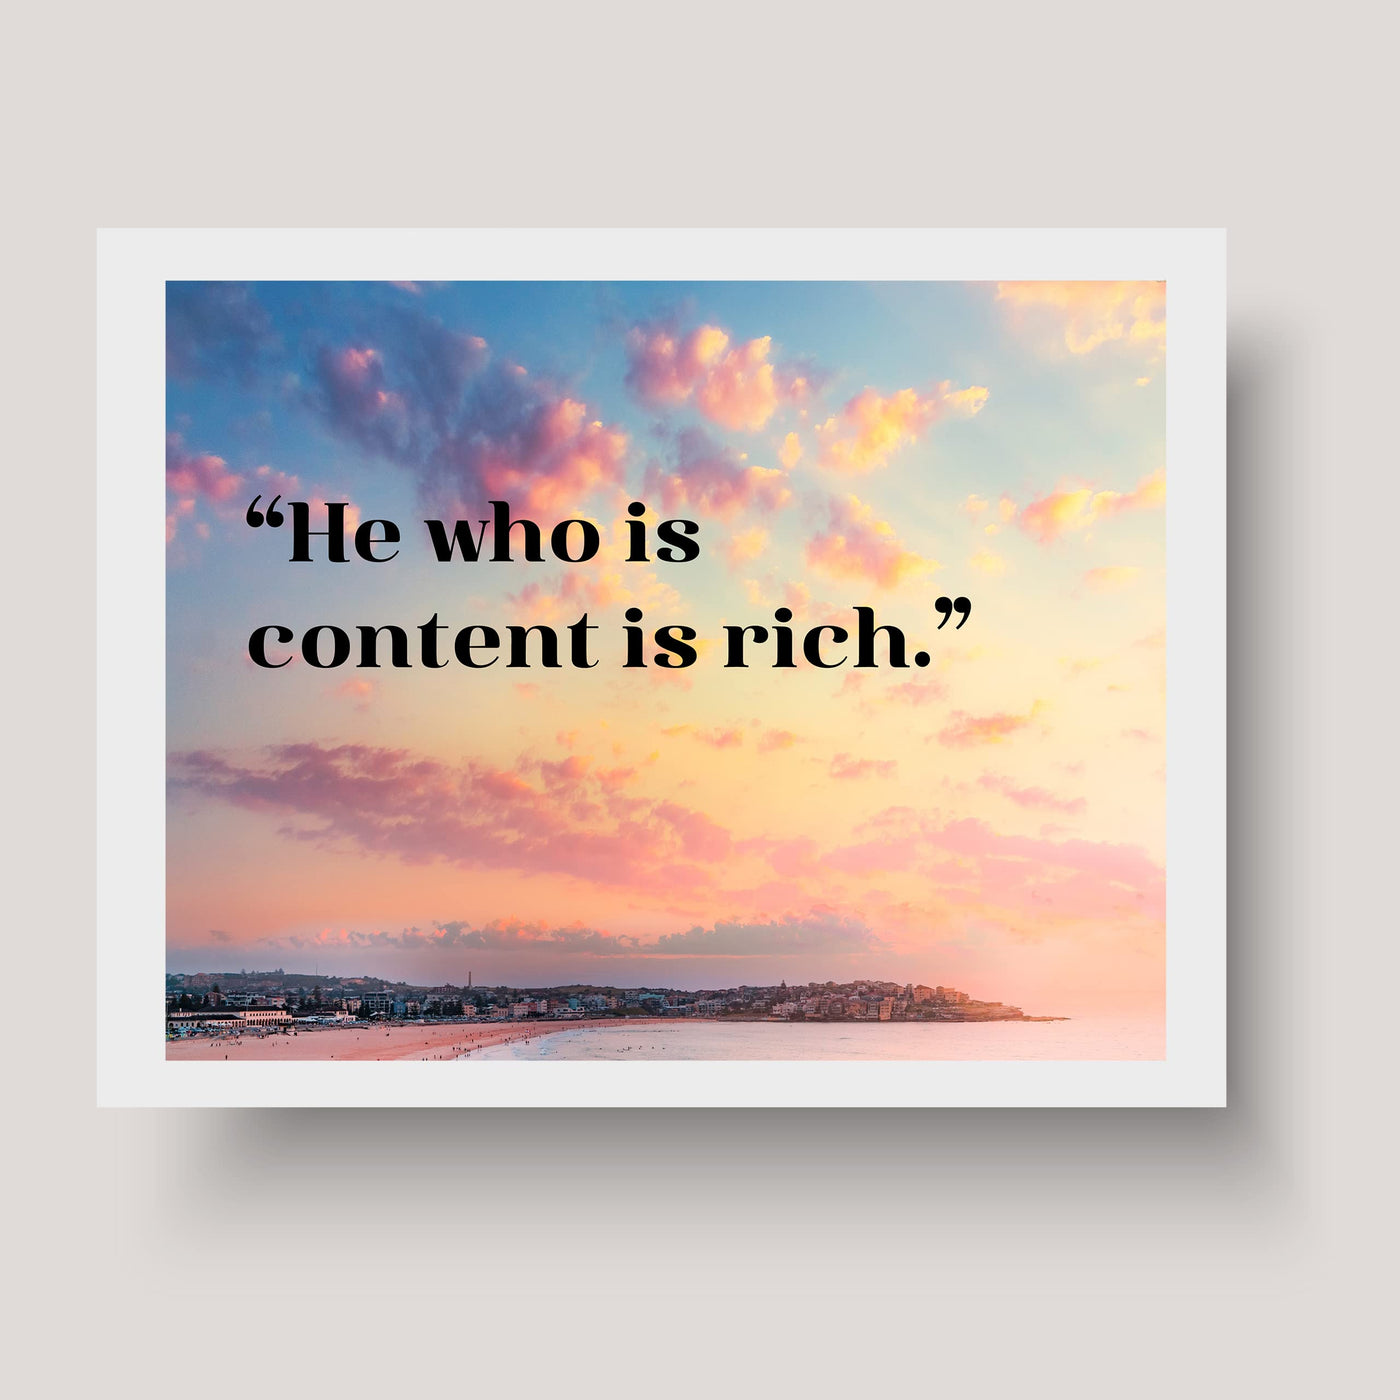 He Who Is Content Is Rich- Inspirational Quotes Wall Art -10 x 8"- Beach Sunset Picture Print -Ready to Frame. Spiritual Decor for Home-Office-School-Ocean Themes. Great Reminder to Be Grateful!